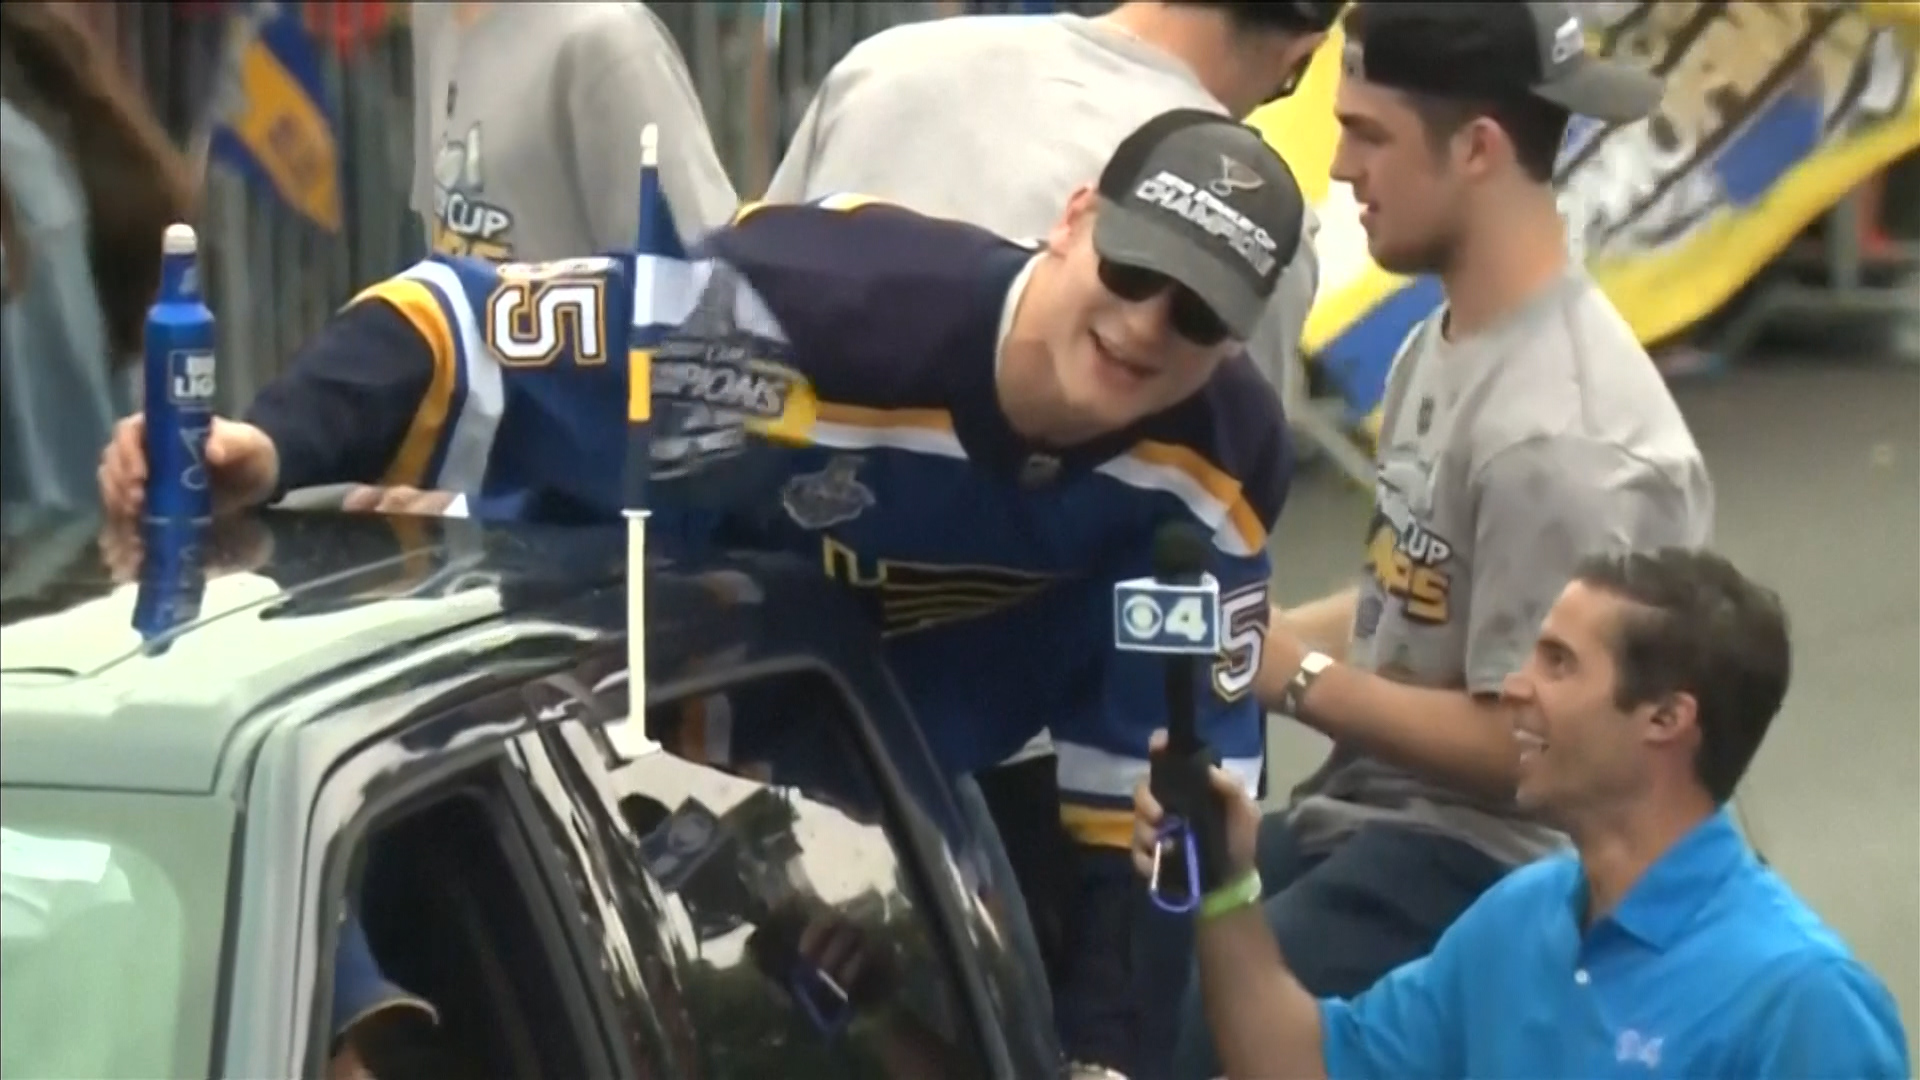 St. Louis Blues celebrate Stanley Cup victory with colorful parade - ABC  News